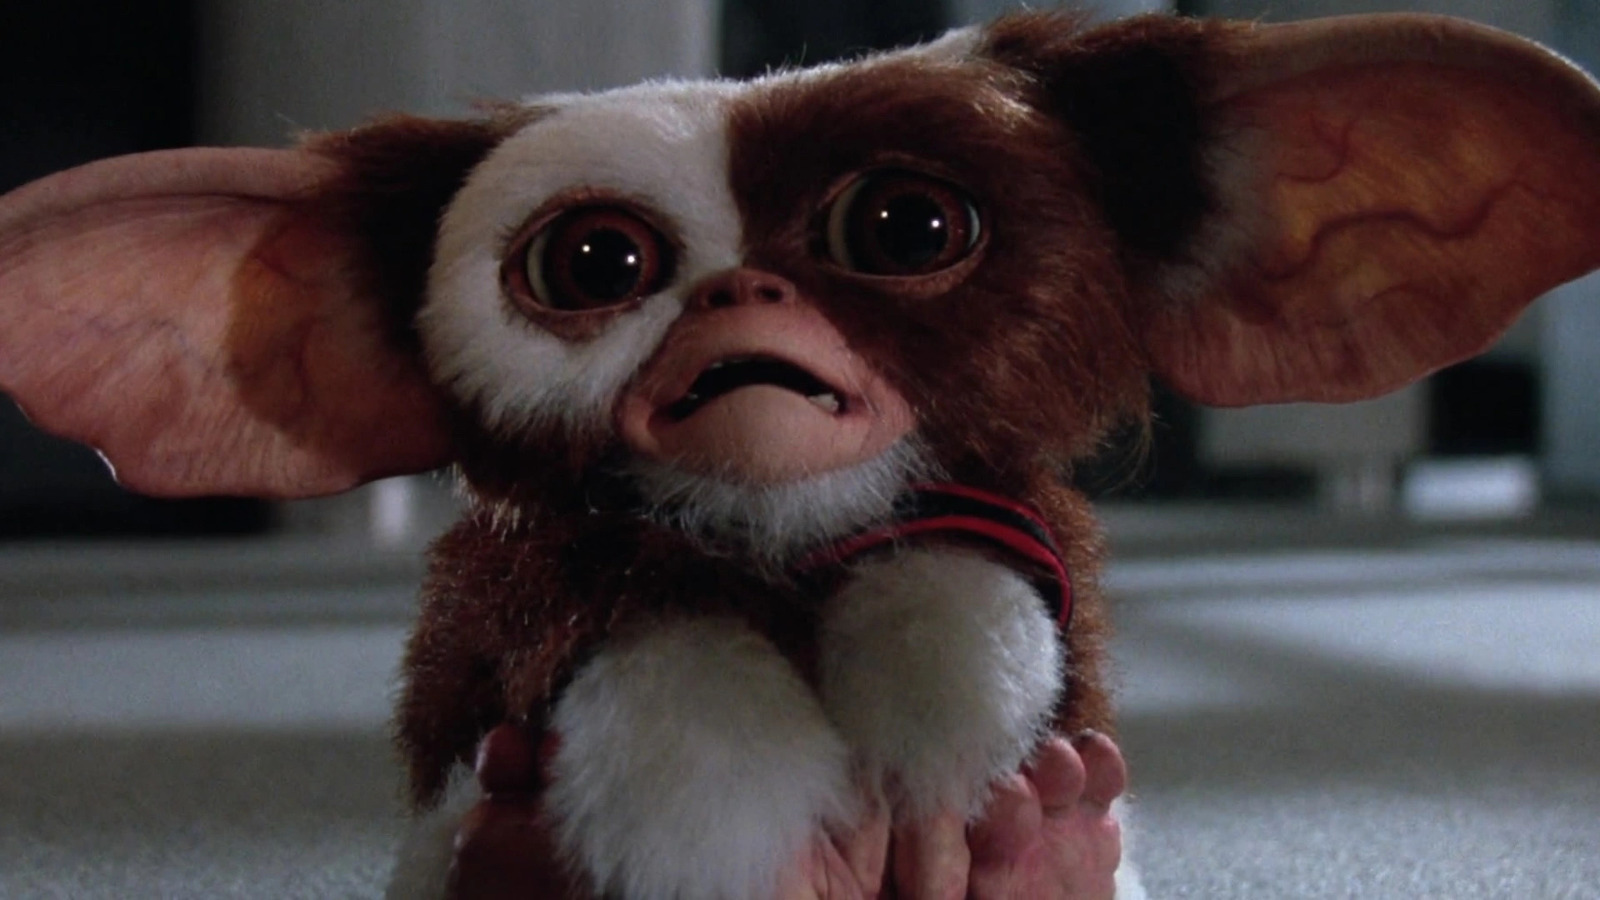 HBO Max 2022 Preview Video Includes Tiny First Look at Gremlins: Secrets  of the Mogwai [Video] - Bloody Disgusting